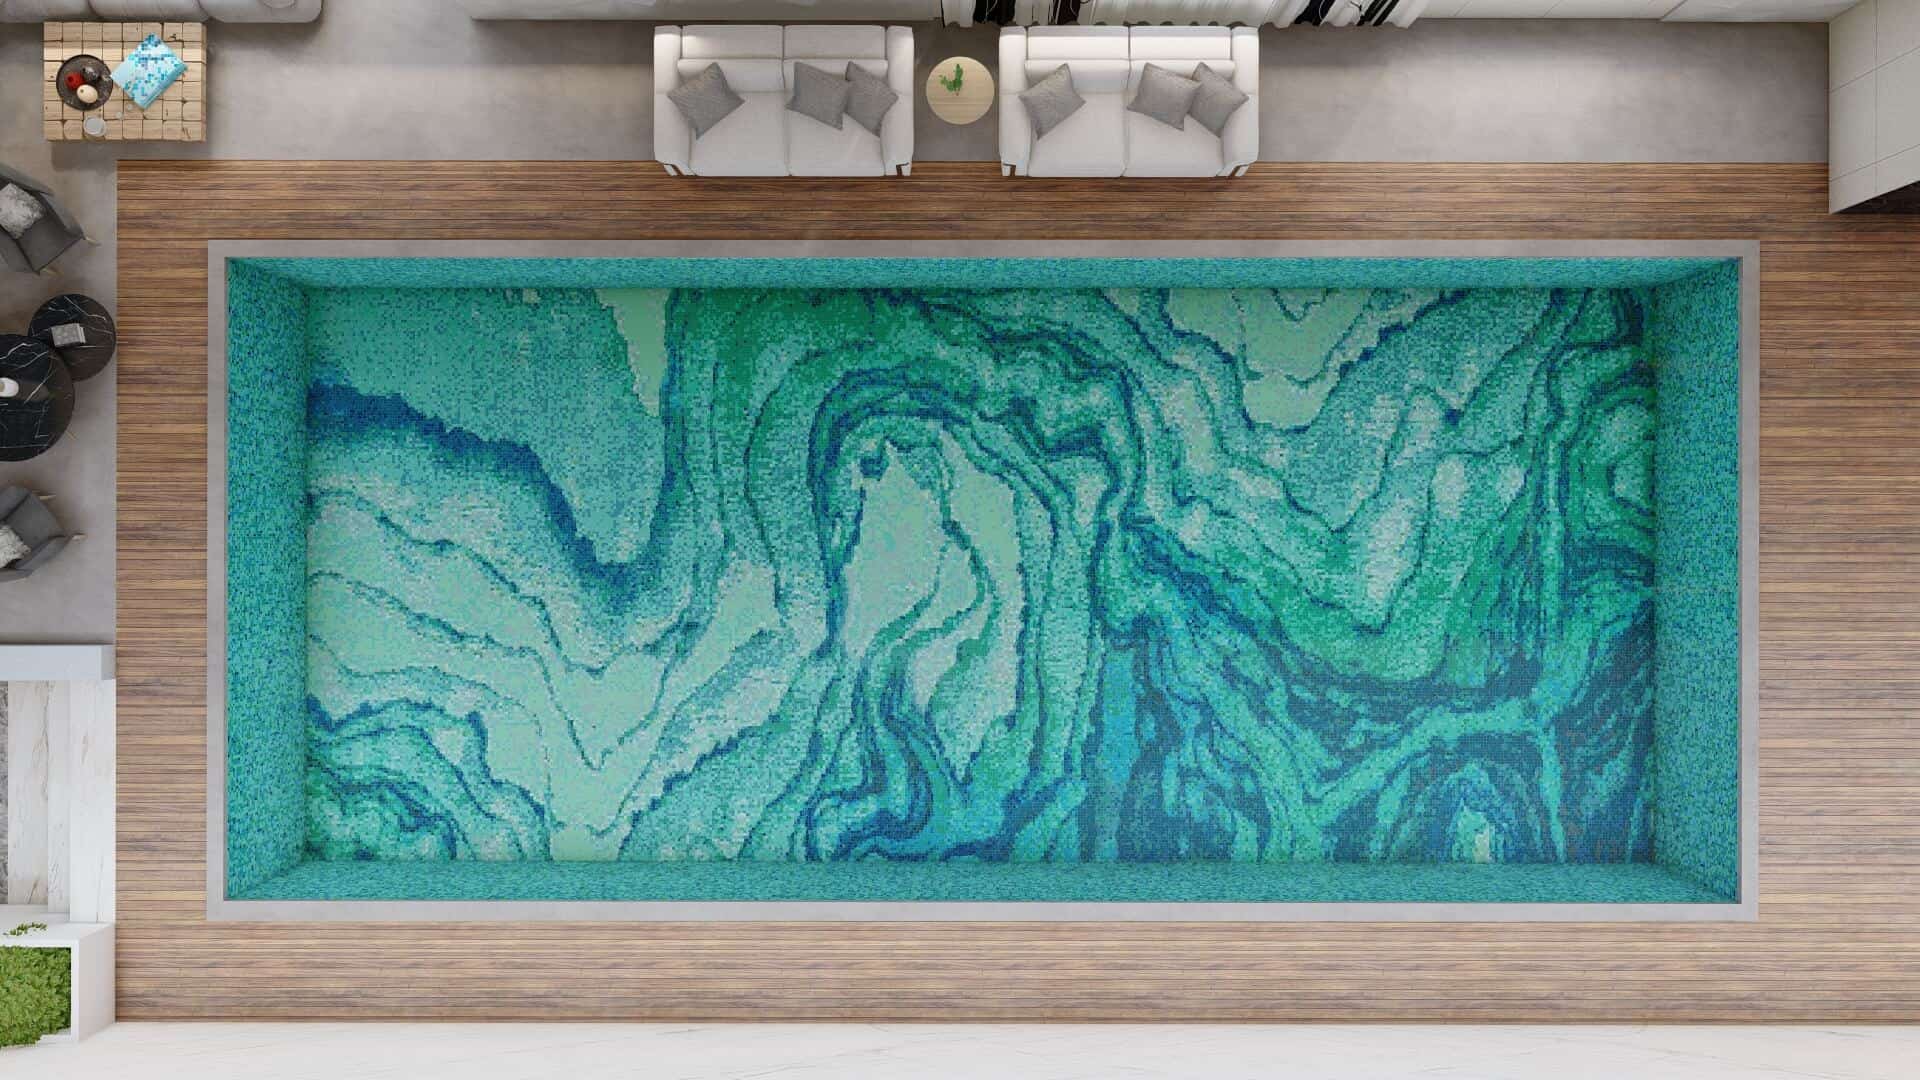 pixelated pool mosaics in shades of greens and blues